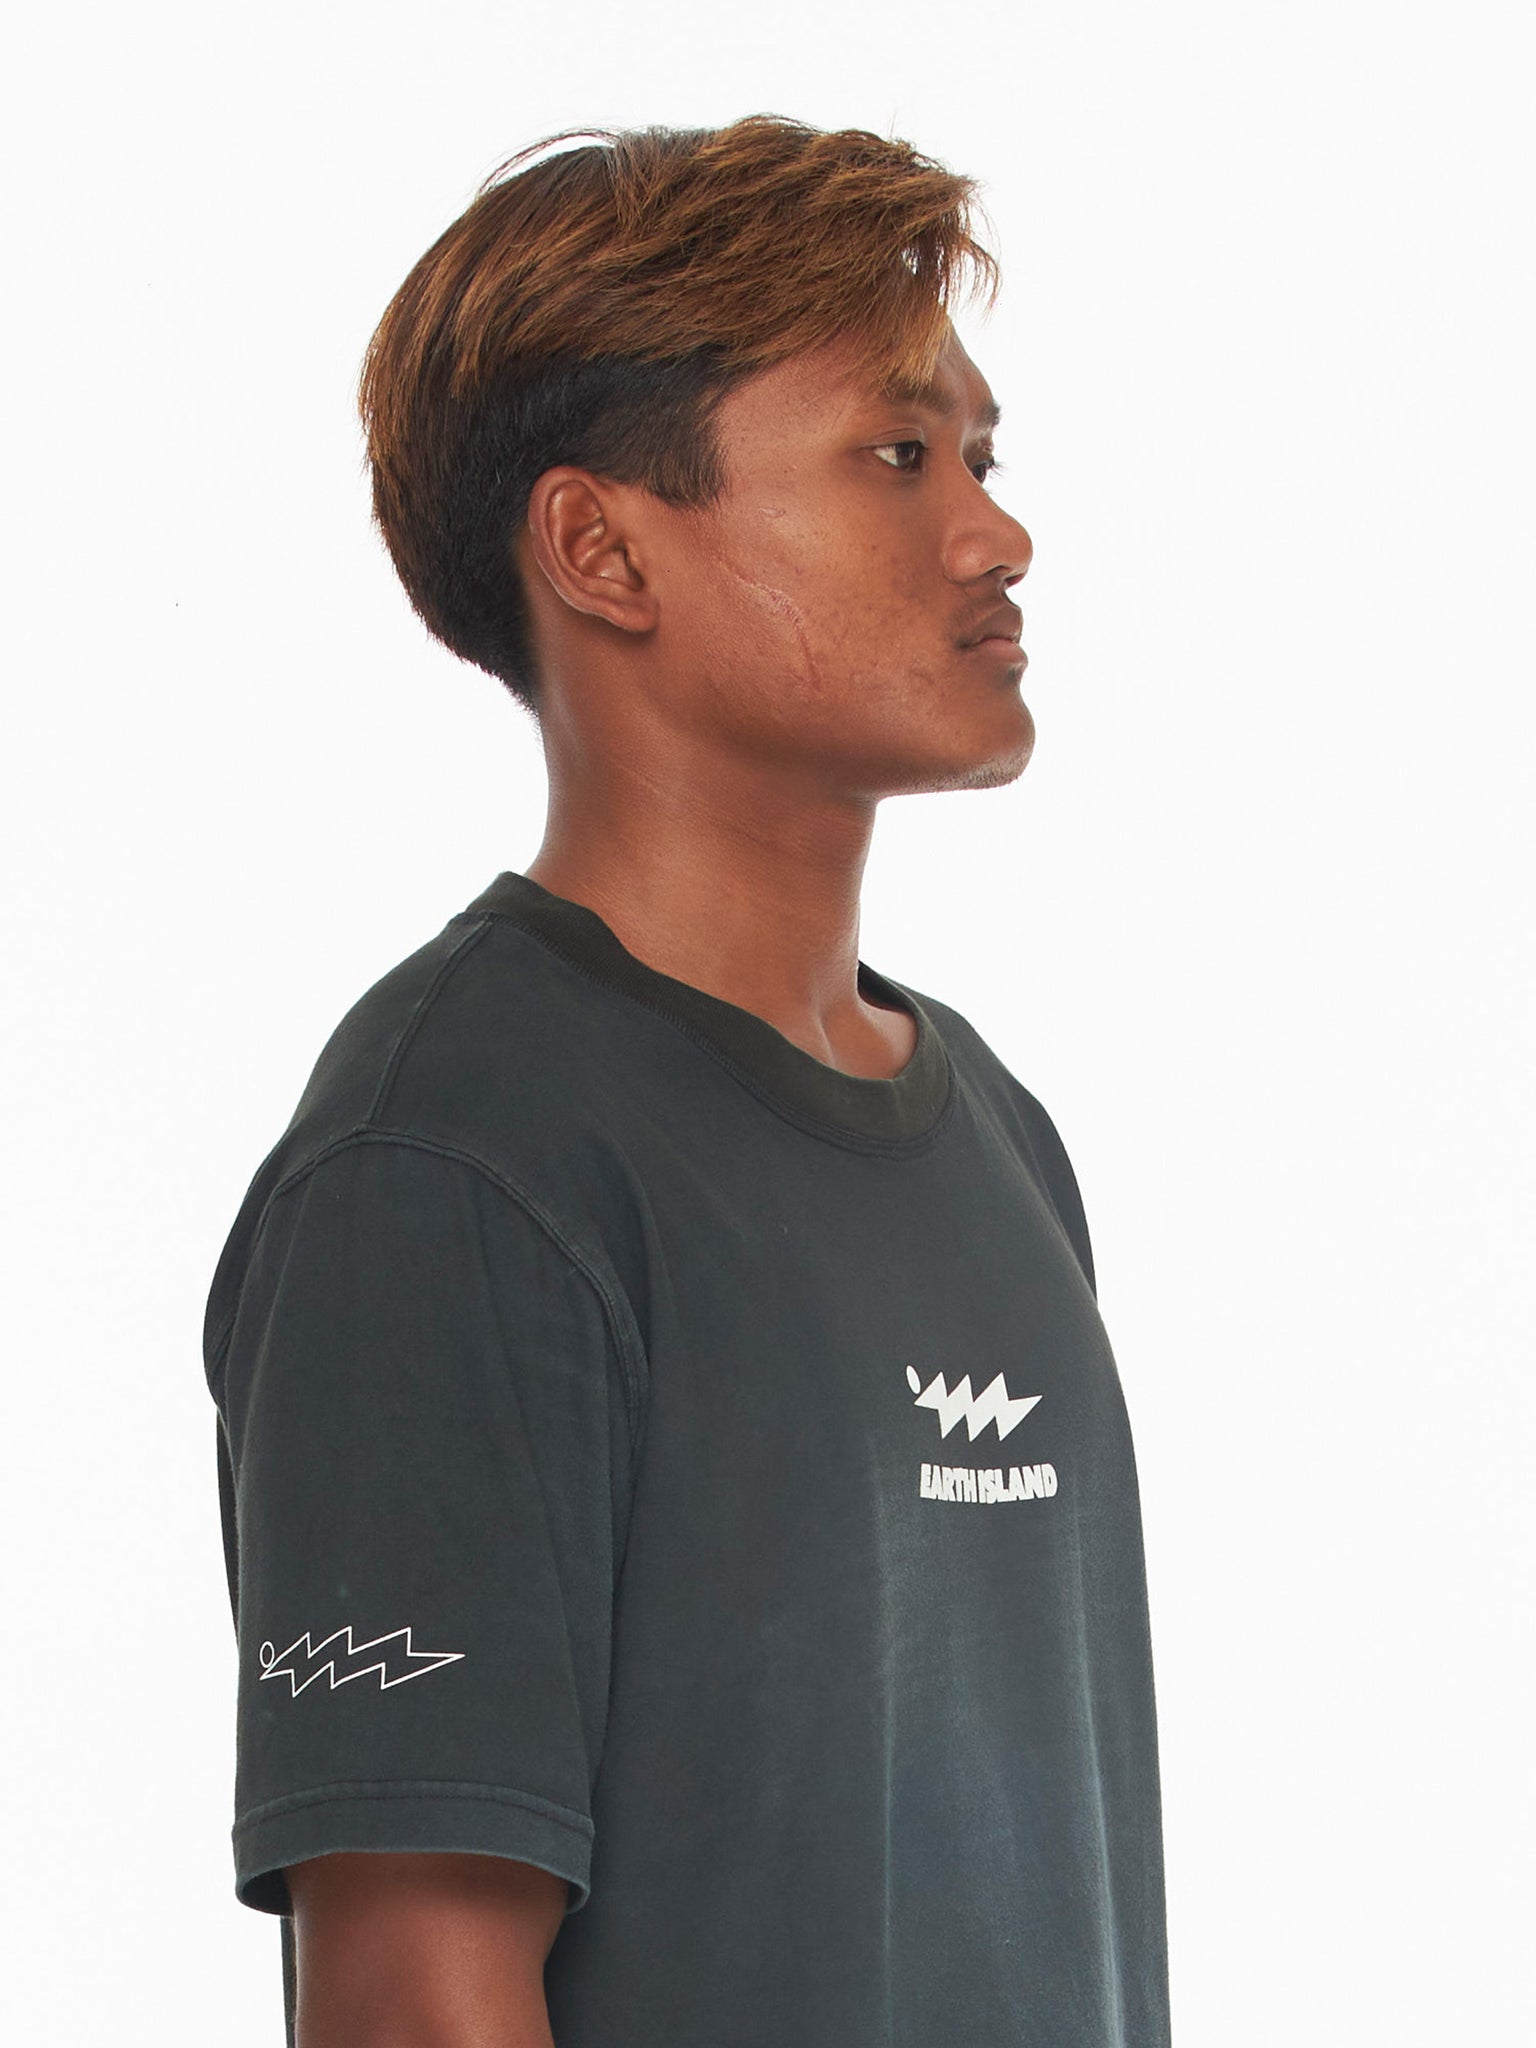 Earth Island - Surf Culture and Lifestyle - Product - Black T Shirt